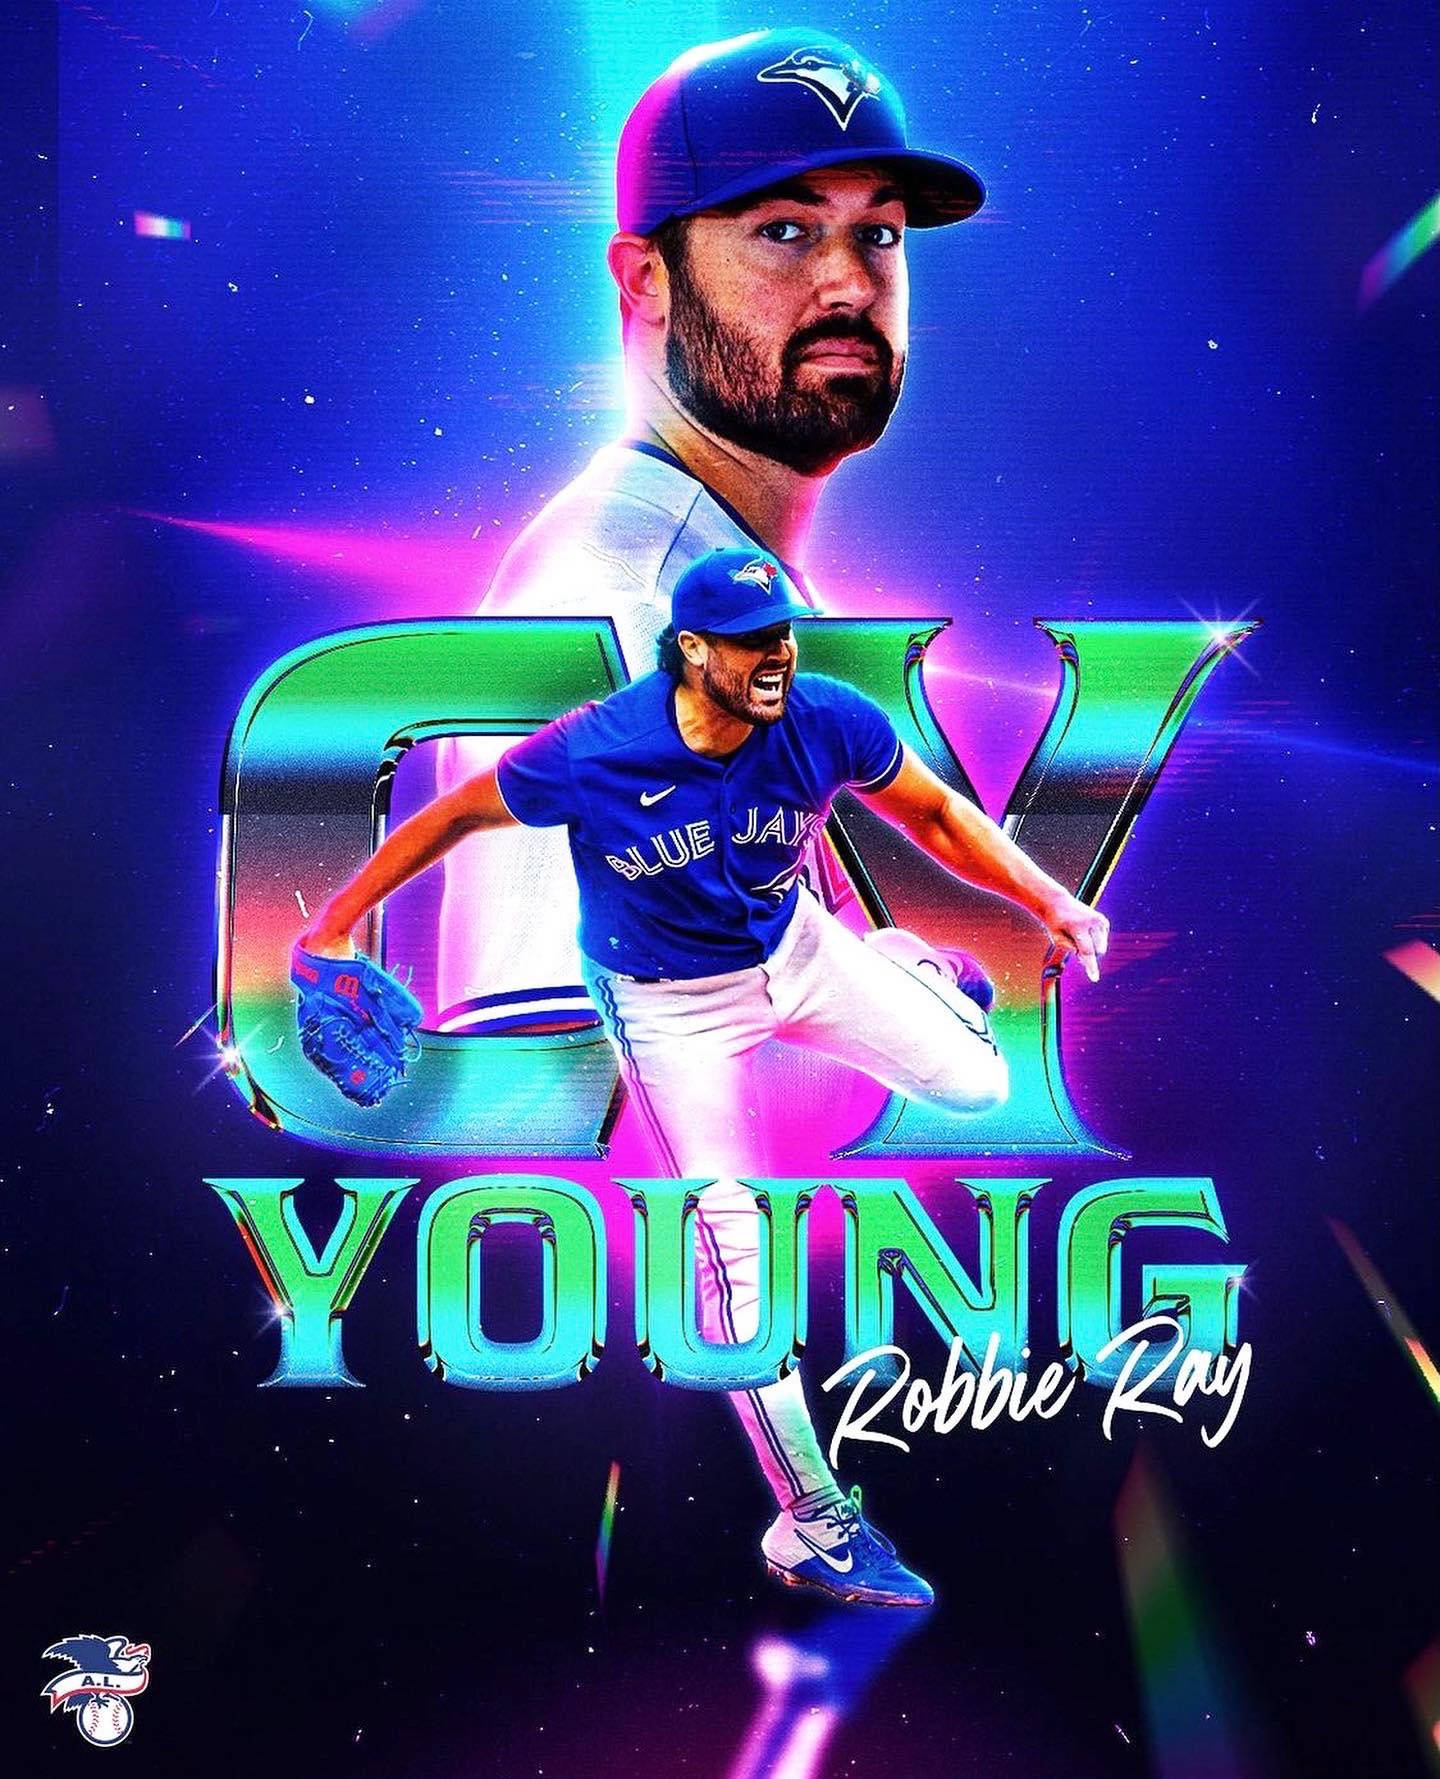 Robbie Ray CY Young Poster Wallpaper